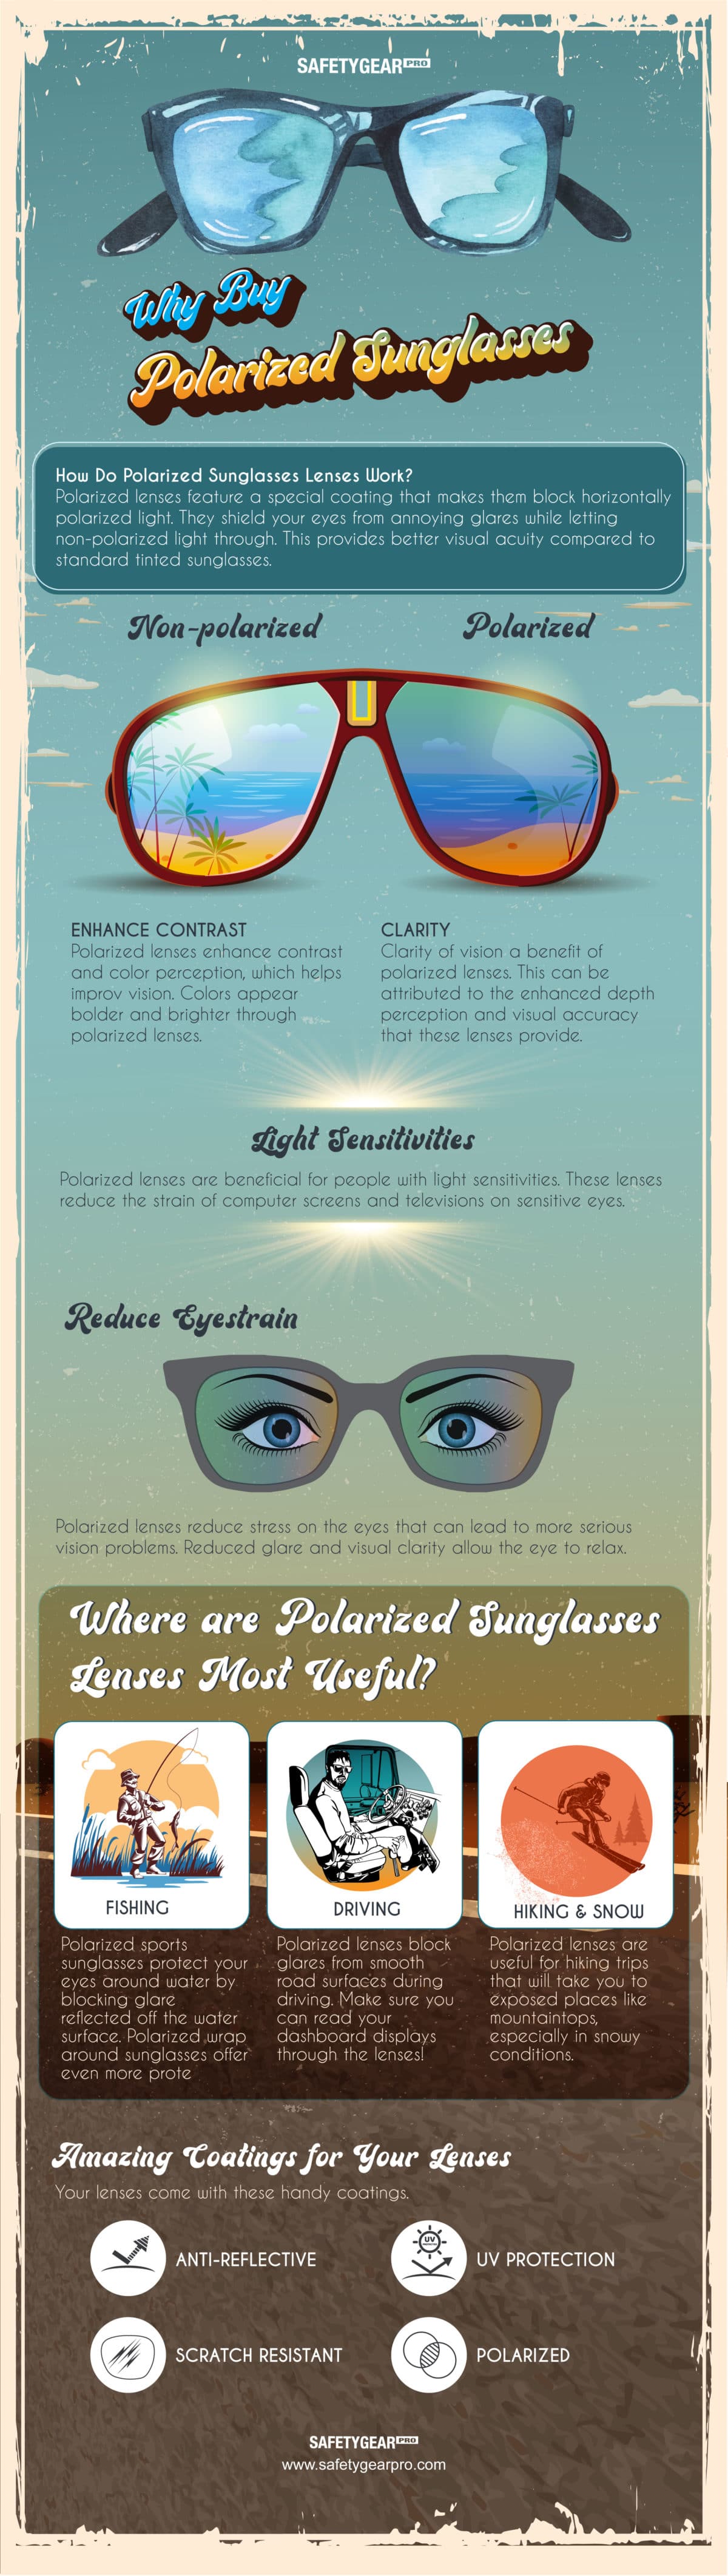 Why You Should Buy Polarized Sunglasses Infographic